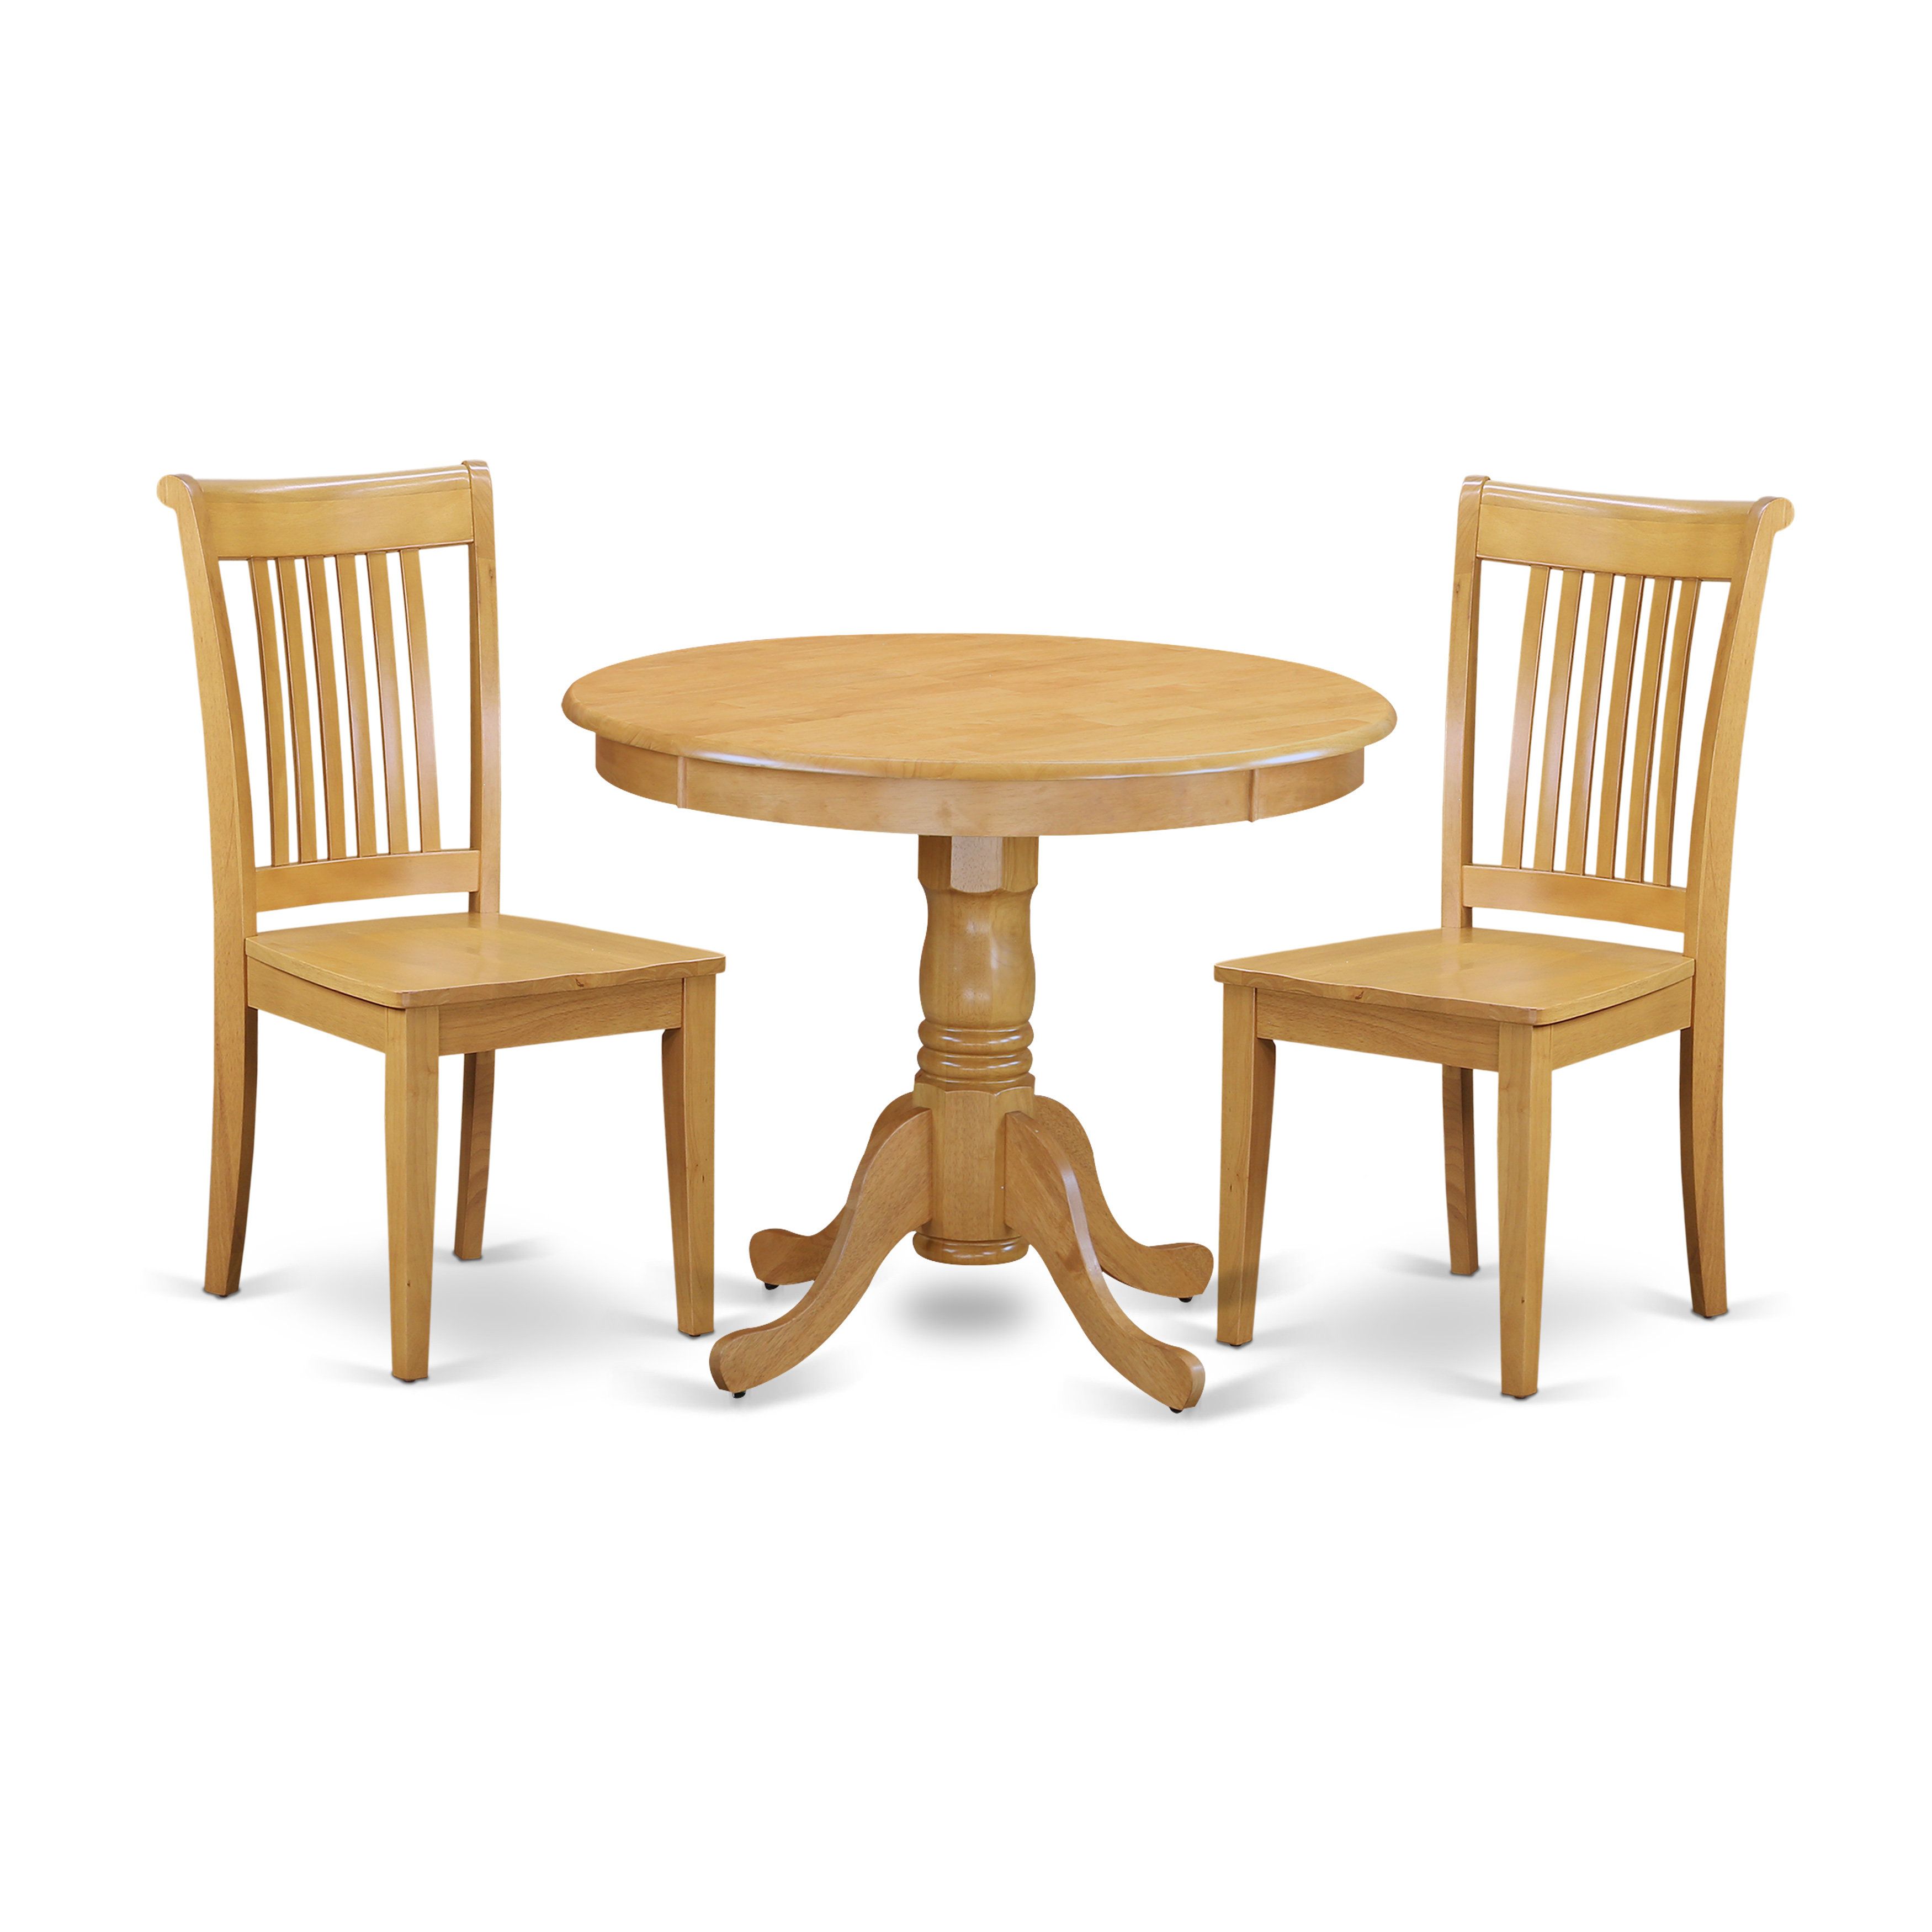 Well Known West Hill Family Table 3 Piece Dining Sets Inside August Grove Brendan 3 Piece Breakfast Nook Solid Wood Dining Set (View 20 of 20)